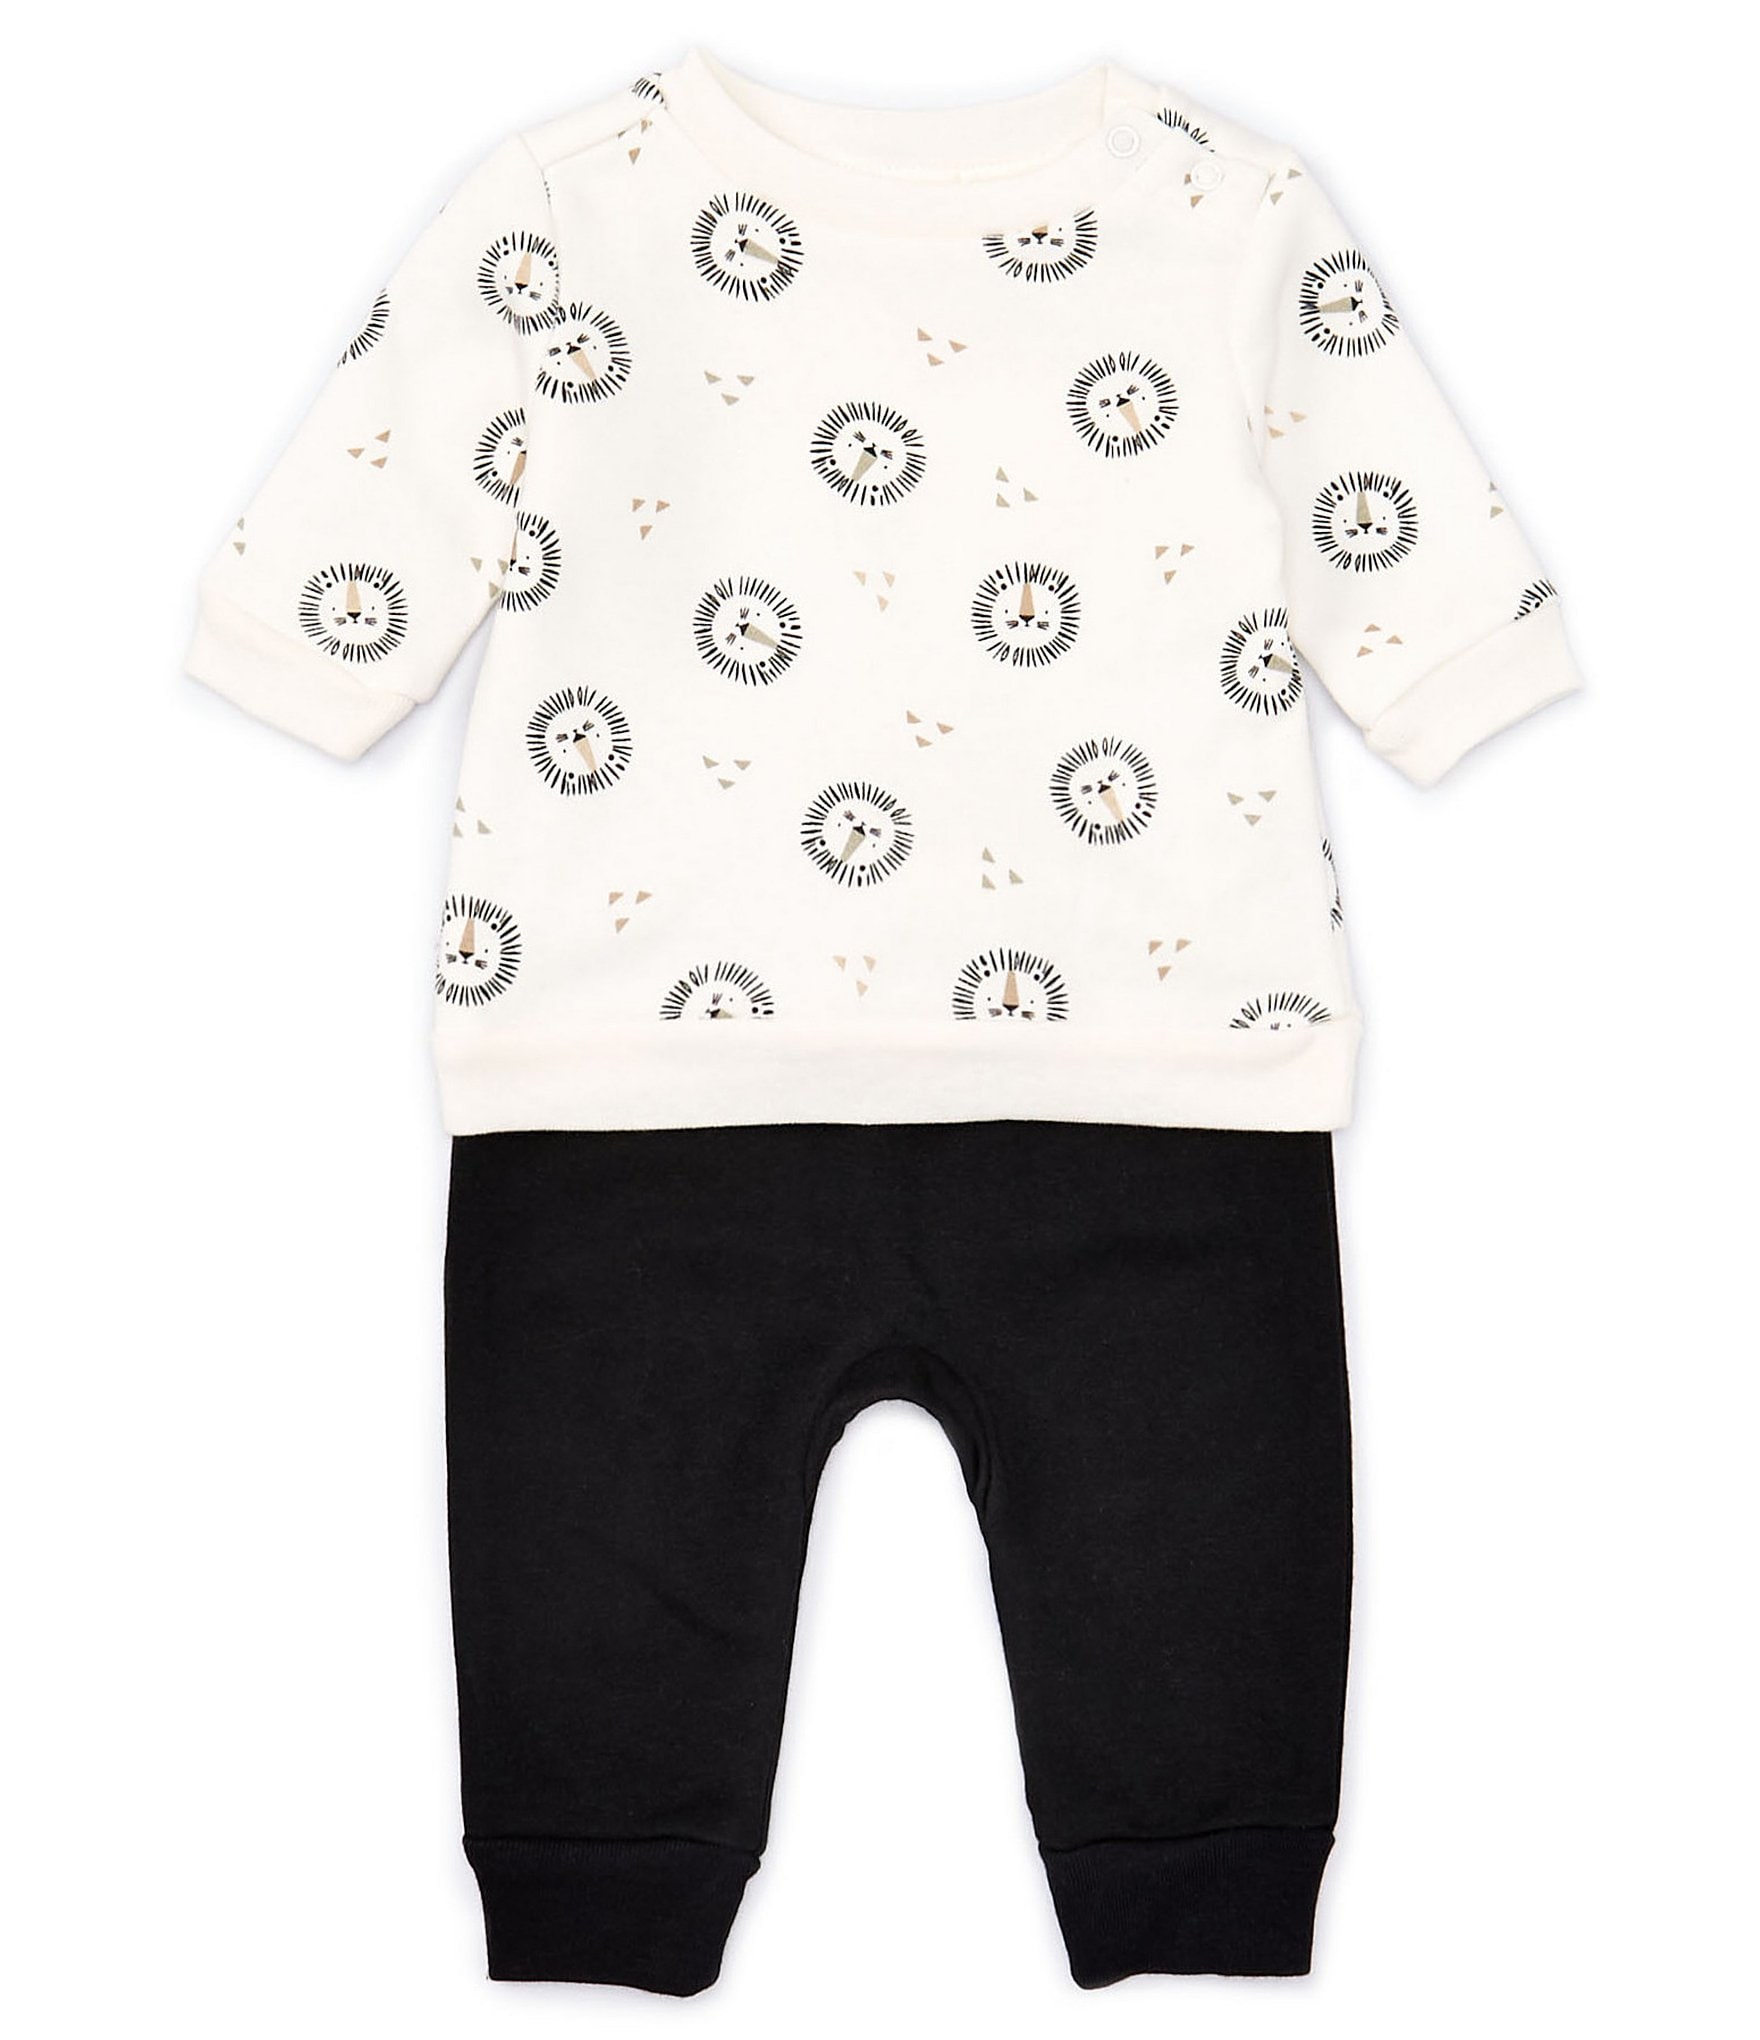 Starting Out Baby Boys Newborn-24 Months Long Sleeve Lion Printed ...